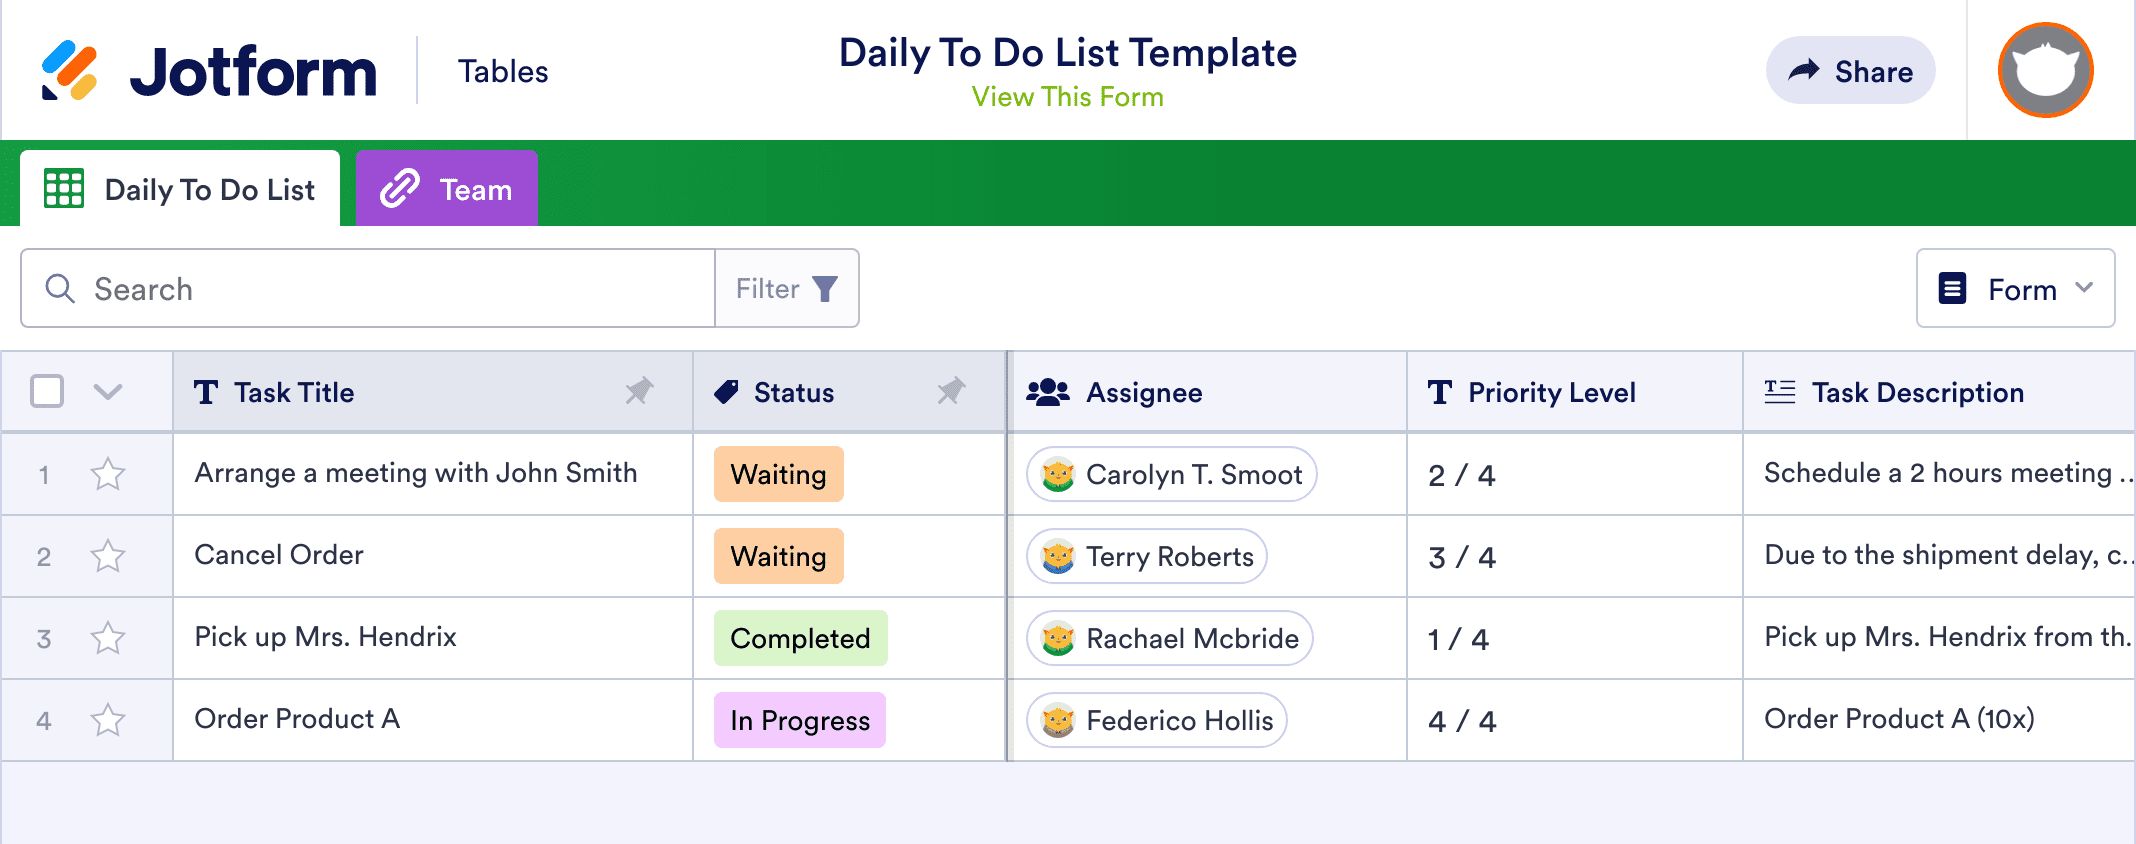 Daily To Do List Template | Jotform Tables